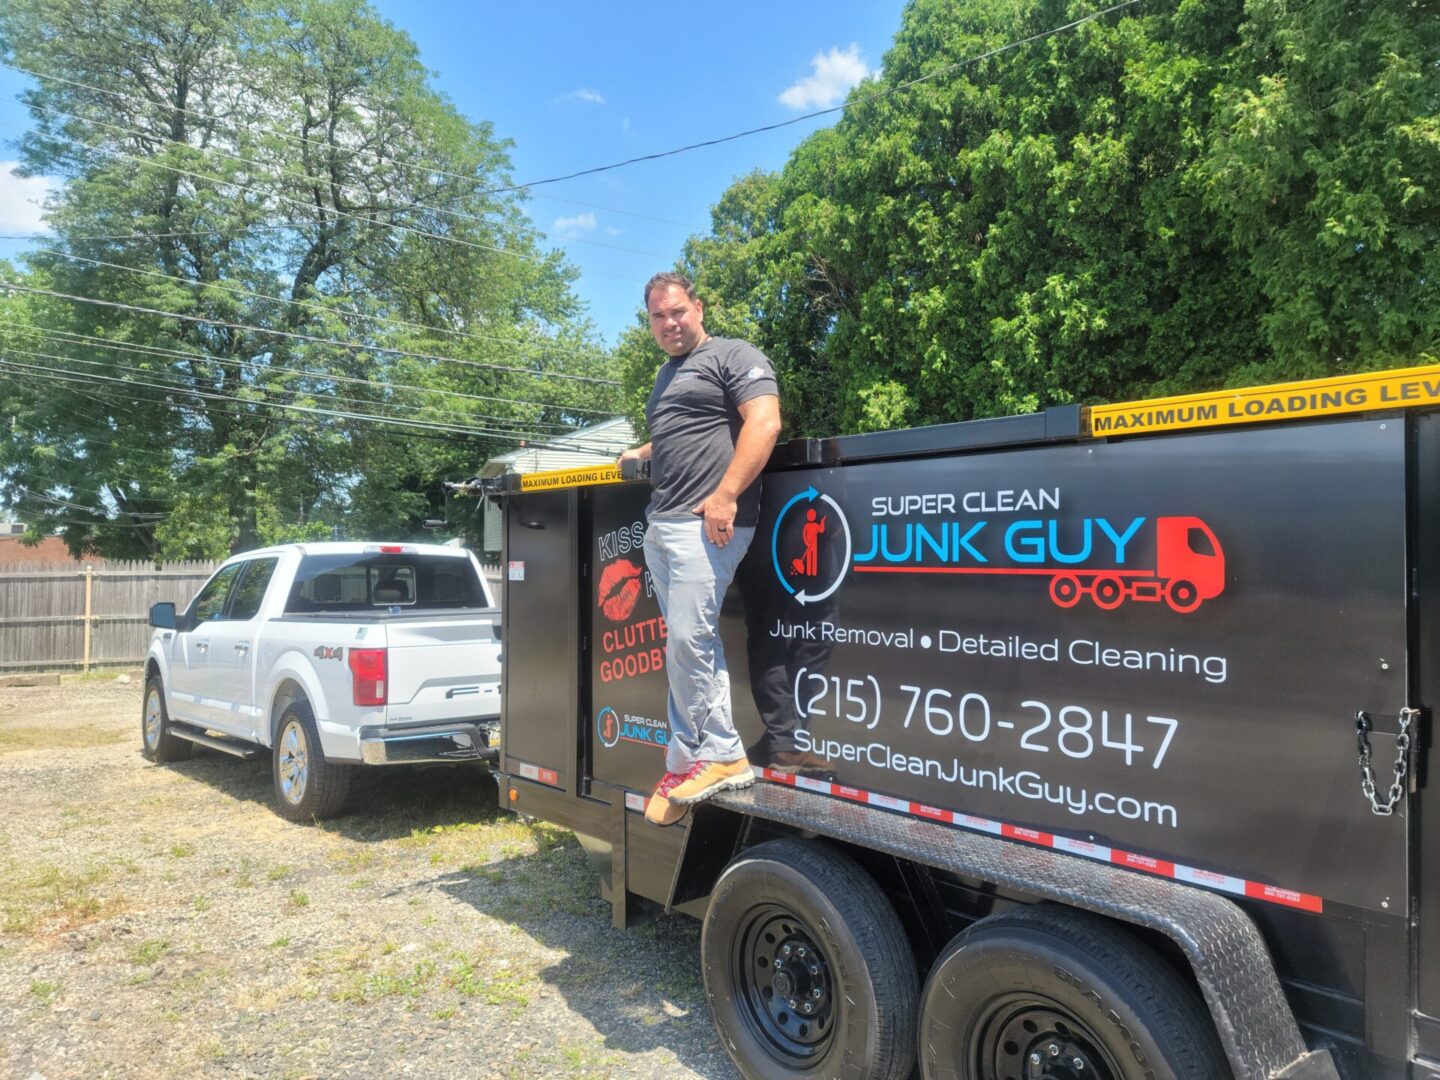 A Man Standing on a Truck for Junk